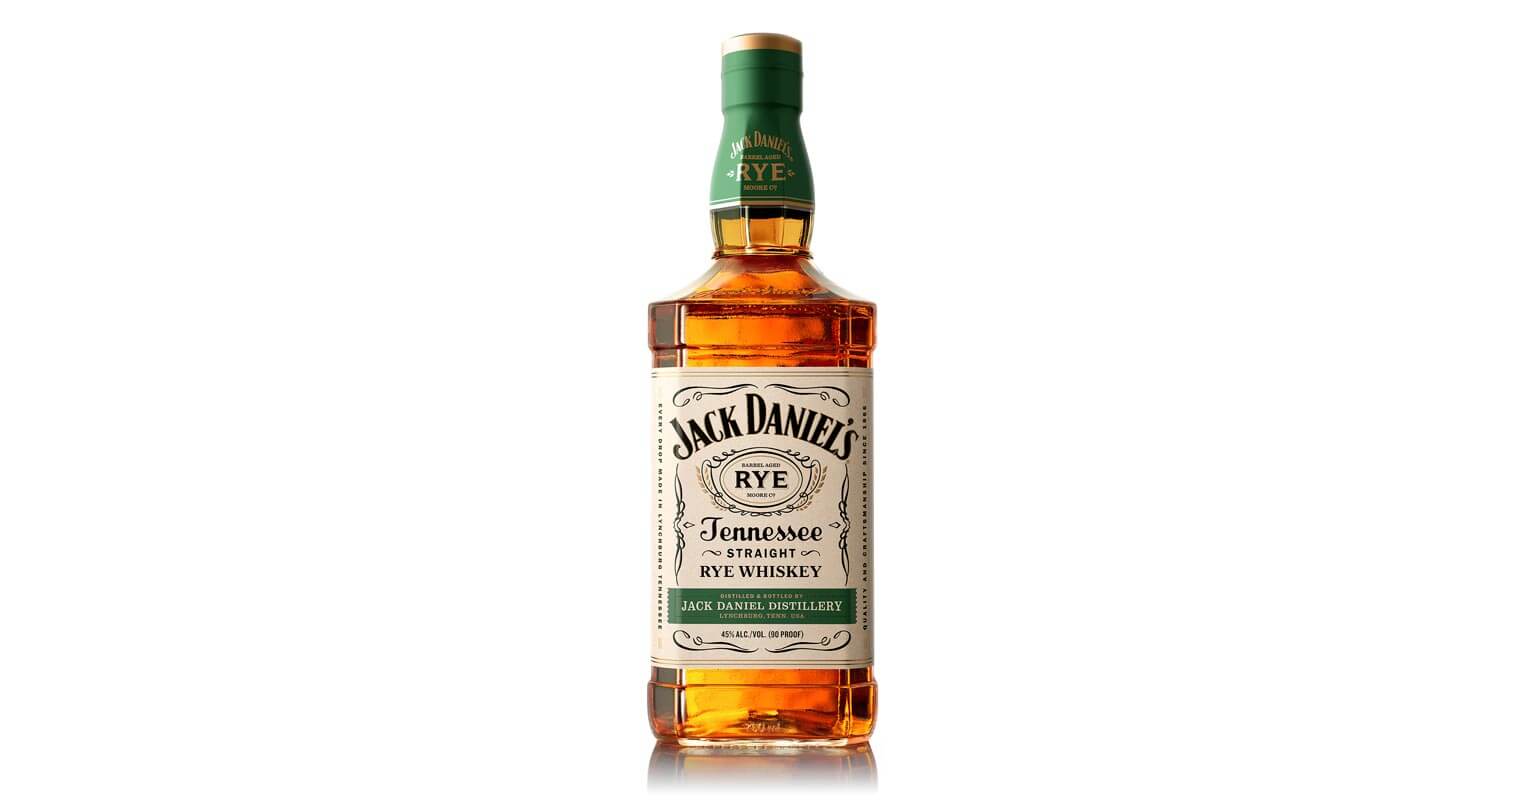 Jack Daniel's Tennessee Rye Launches, featured image